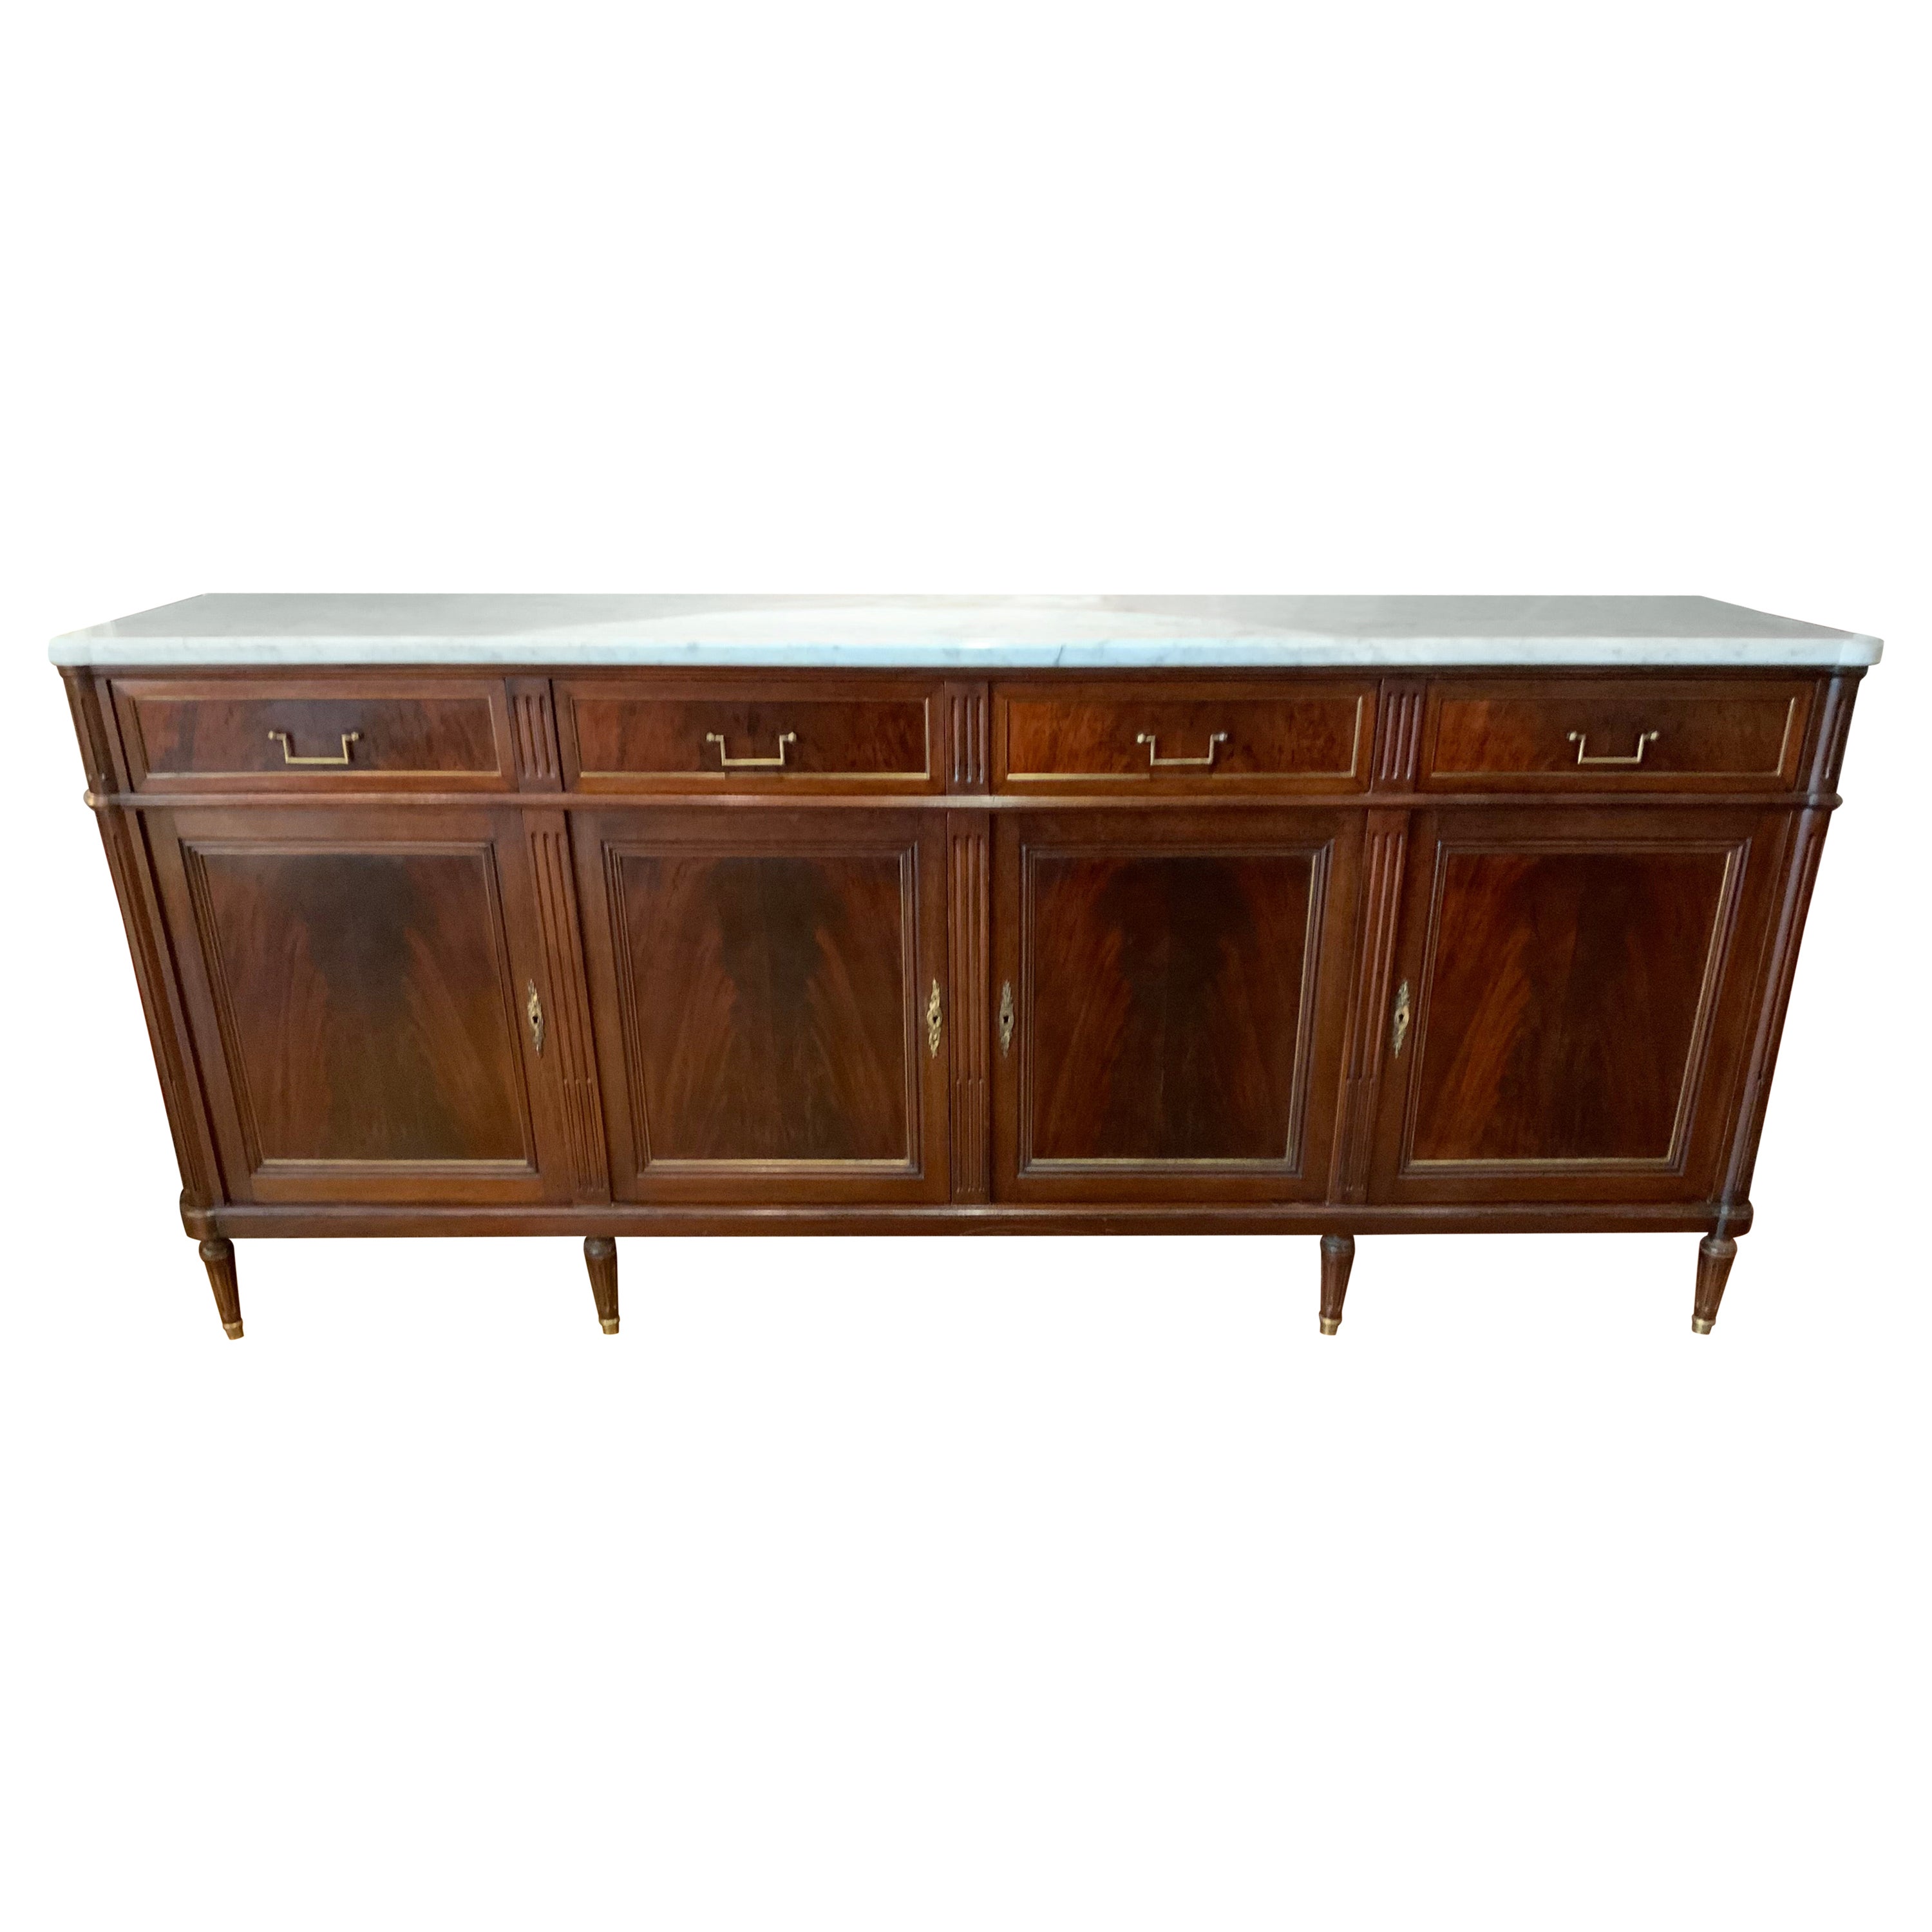 Louis XVI-Style sideboard/buffet mahogany with white marble top